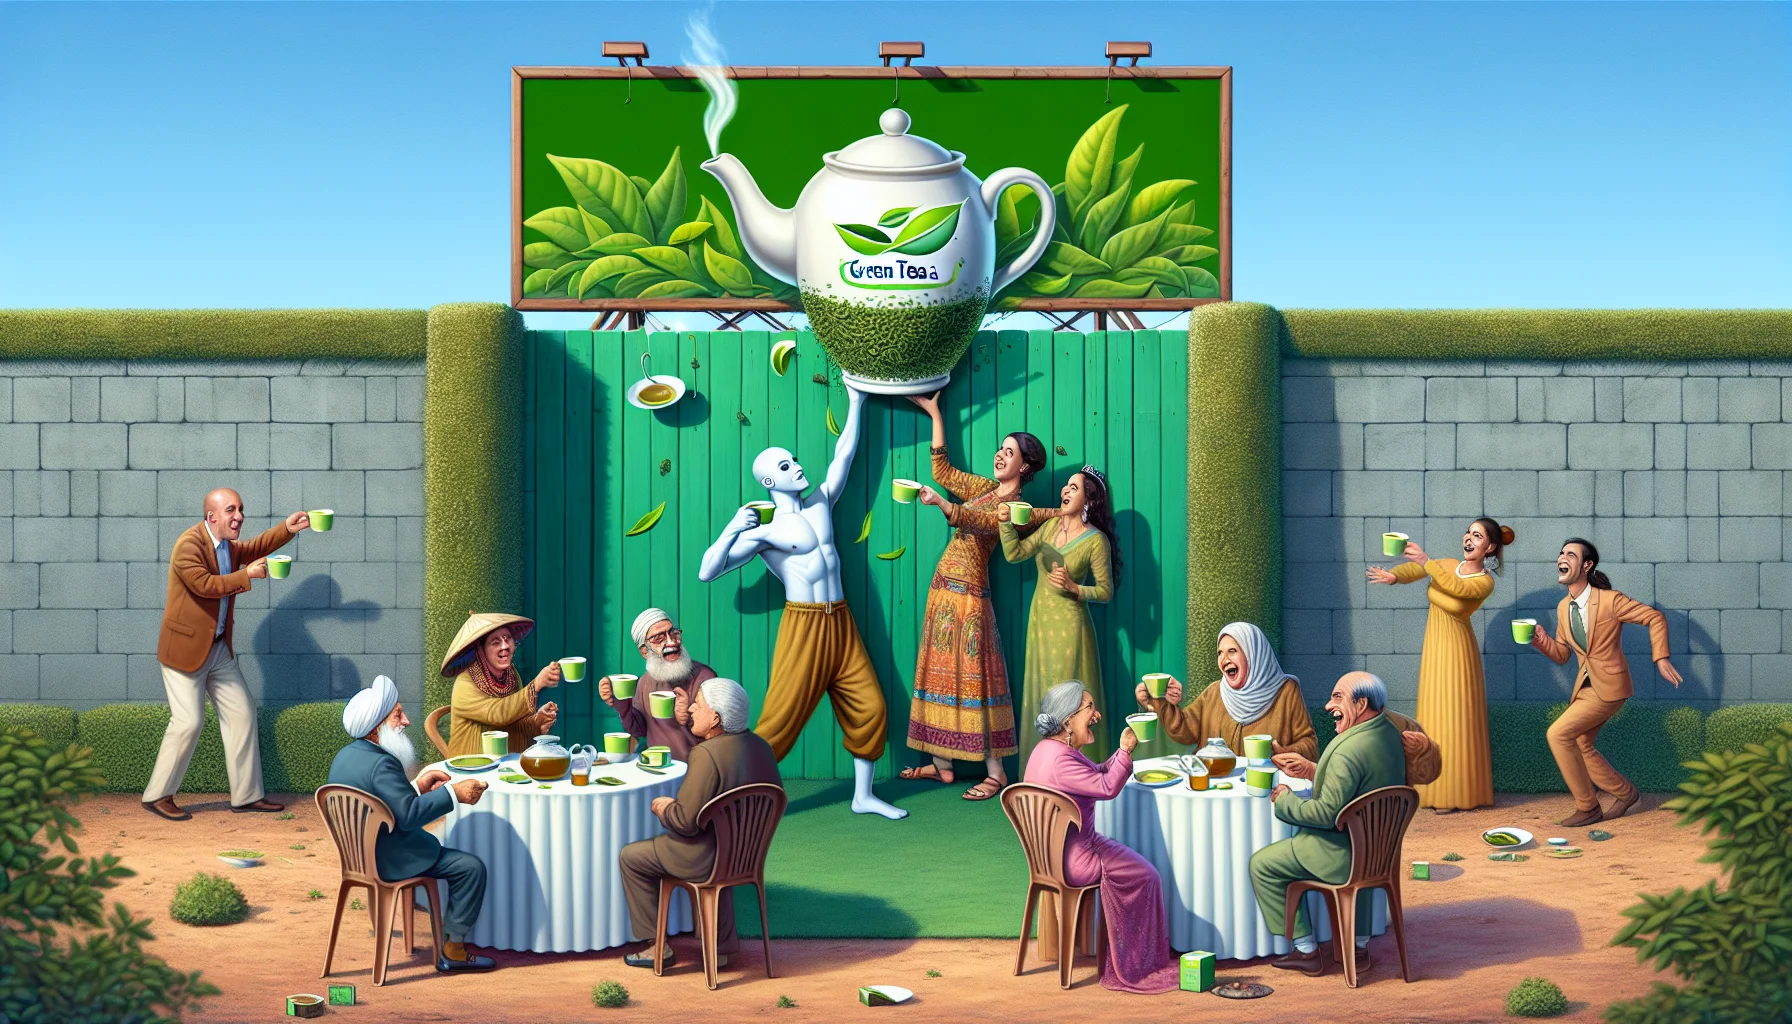 Imagine a humorous scenario set at an outdoor tea party. A huge billboard is set in the background bearing the logo of the best-rated green tea brand -- depicted by a steaming teapot with vibrant green leaves swirling around it -- and the tagline 'Sip your way to serenity!' Below, an interesting gathering of guests are seen having fun while sipping green tea. A South Asian gentleman in traditional clothing competes with a Hispanic lady in an elegant dress, both trying to balance teacups on their heads. A Caucasian elderly man and a Middle-Eastern woman, each holding a cup of green tea, are laughing uproariously at the antics of a mime pretending to be trapped behind an 'invisible' wall.